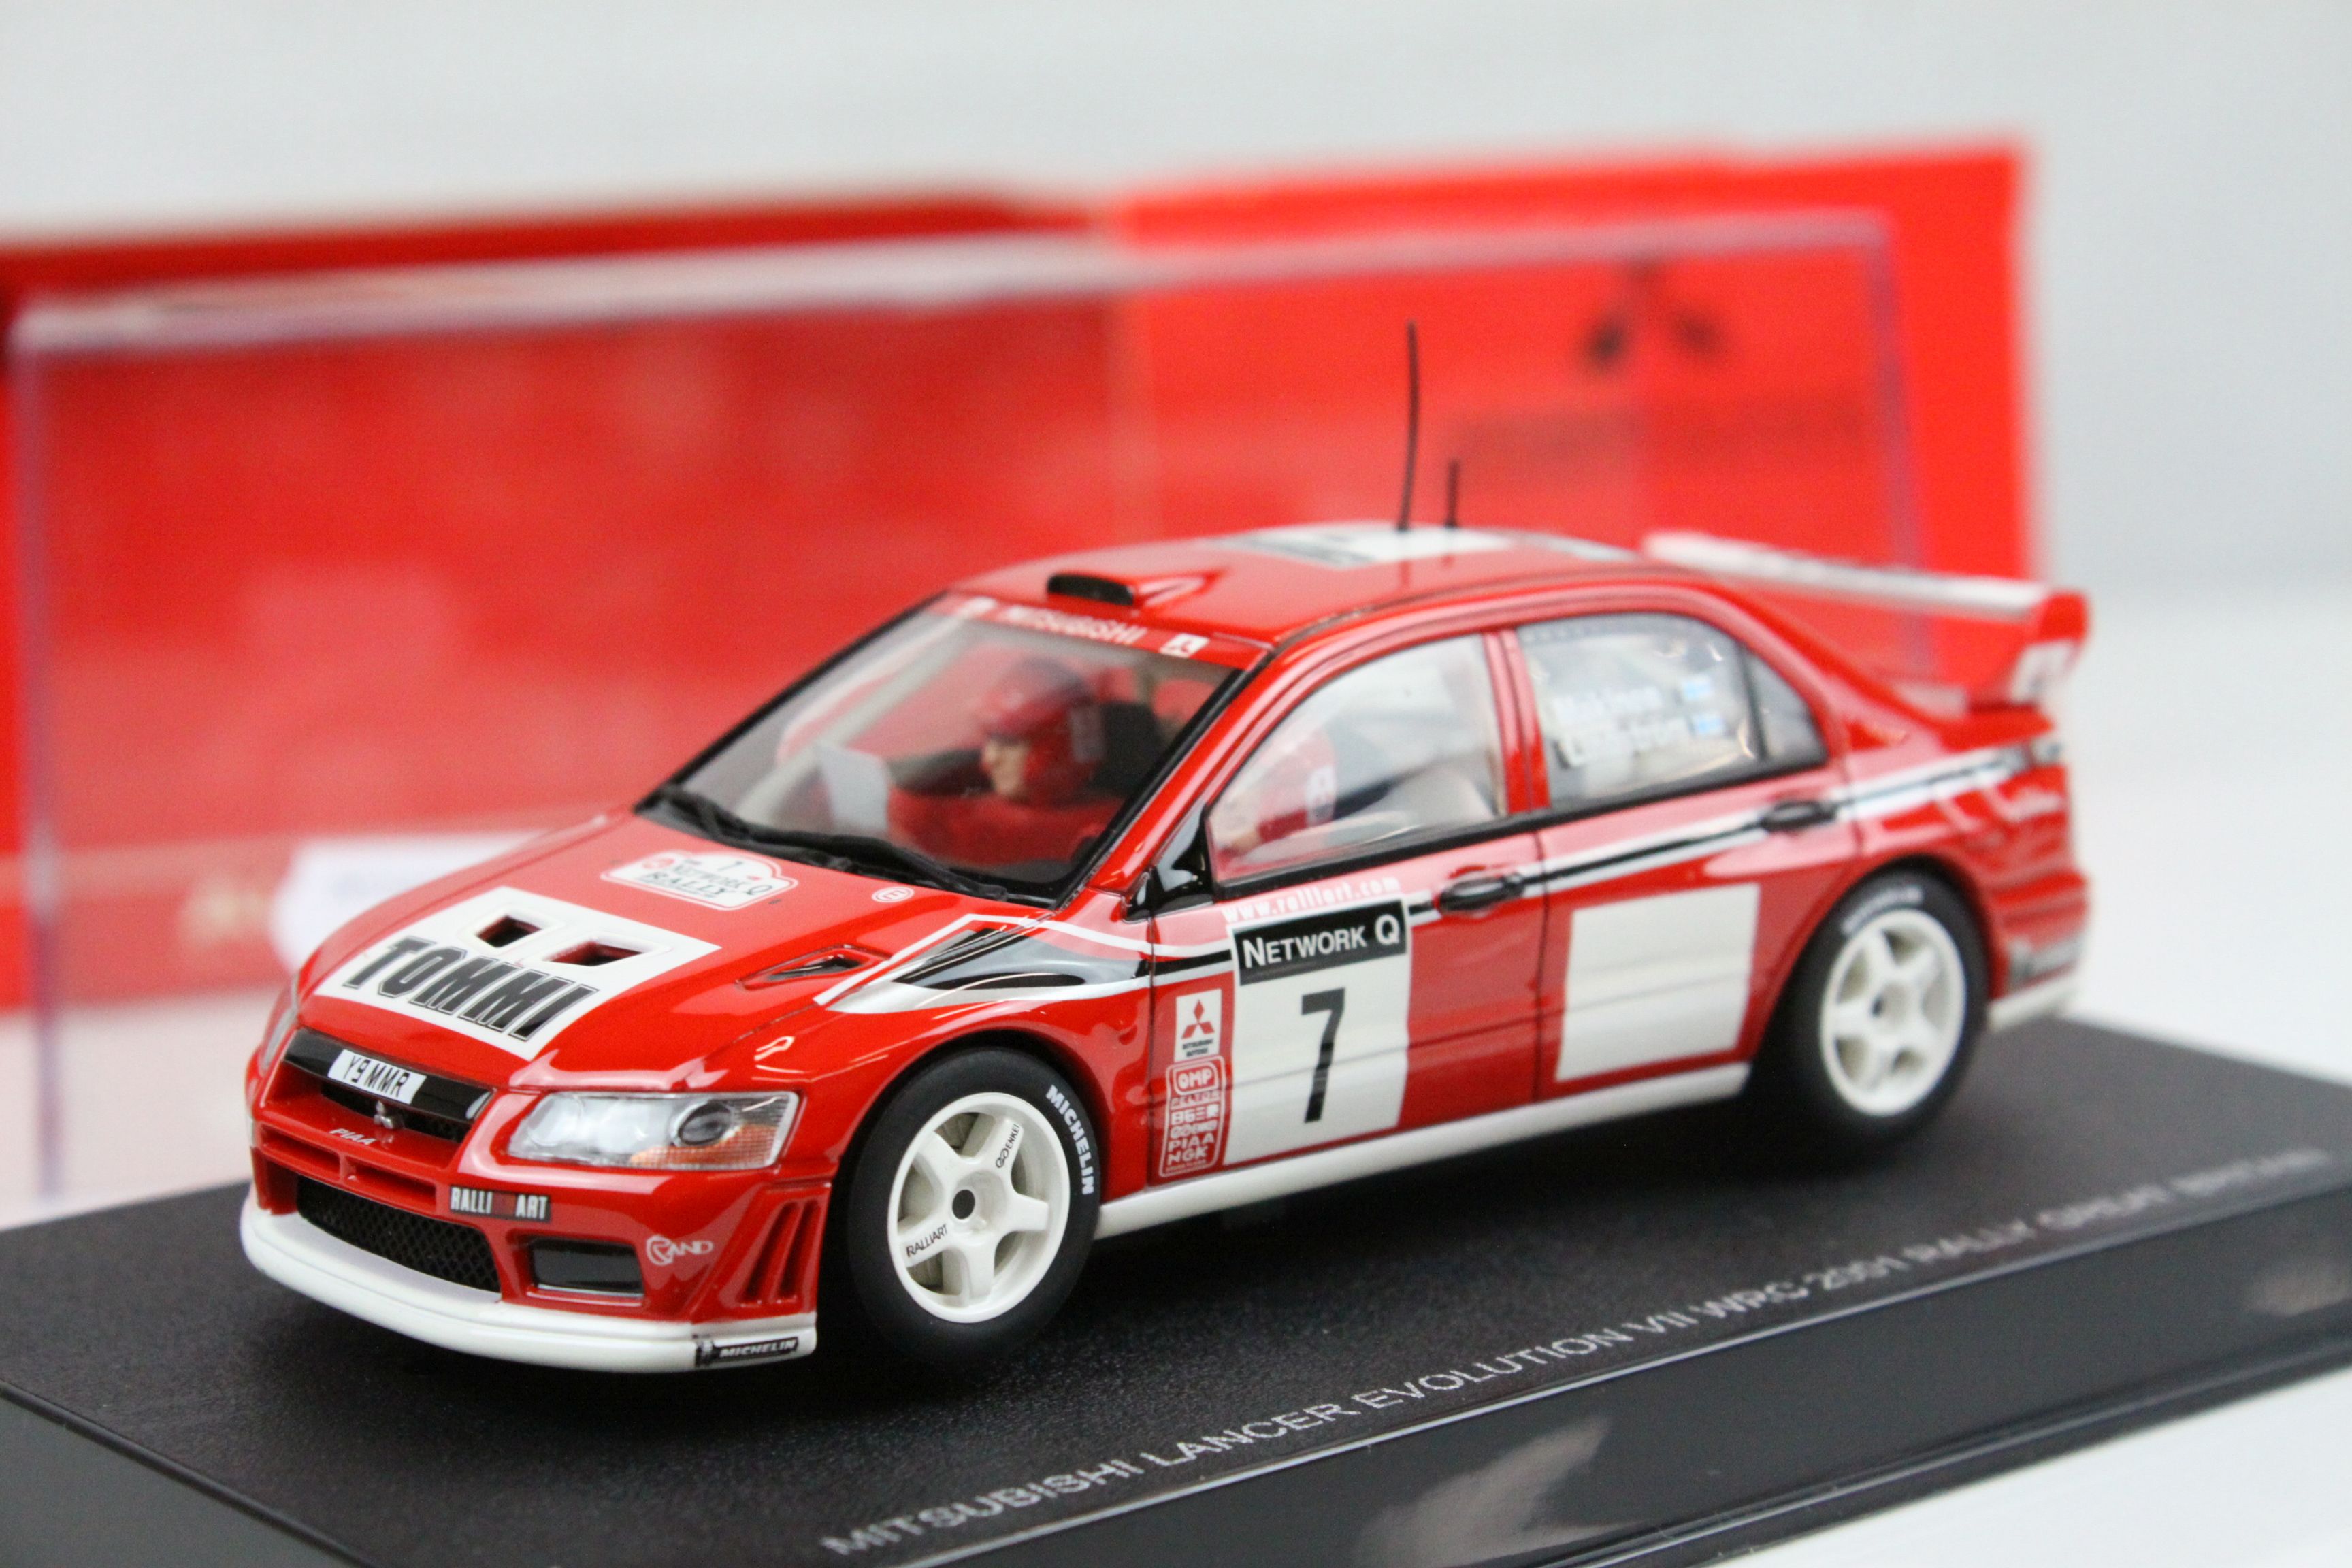 Four cased slot cars to include 3 x Auto Art Slot Racing featuring 13032 Mazda RX-8 (Velocity - Image 13 of 35